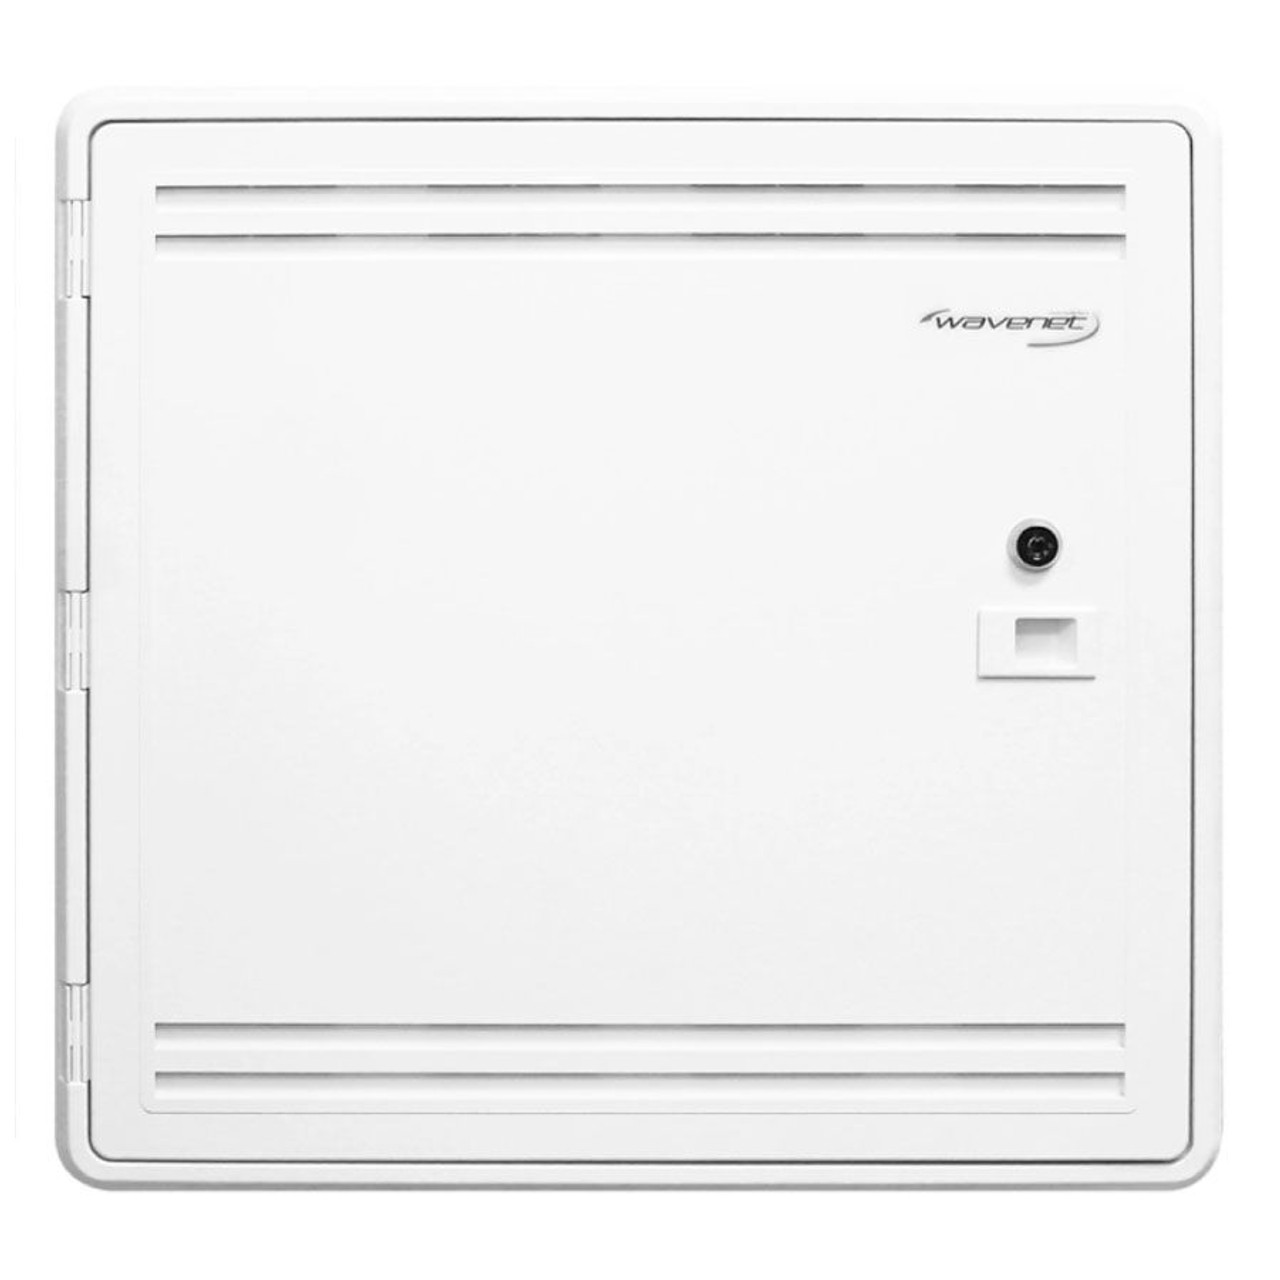 Structured Wiring Enclosure Panel 15 Inch White Plastic for Low Voltage Wi‐Fi Friendly Home with Lockable Hinged Vented Door WHWS15AE